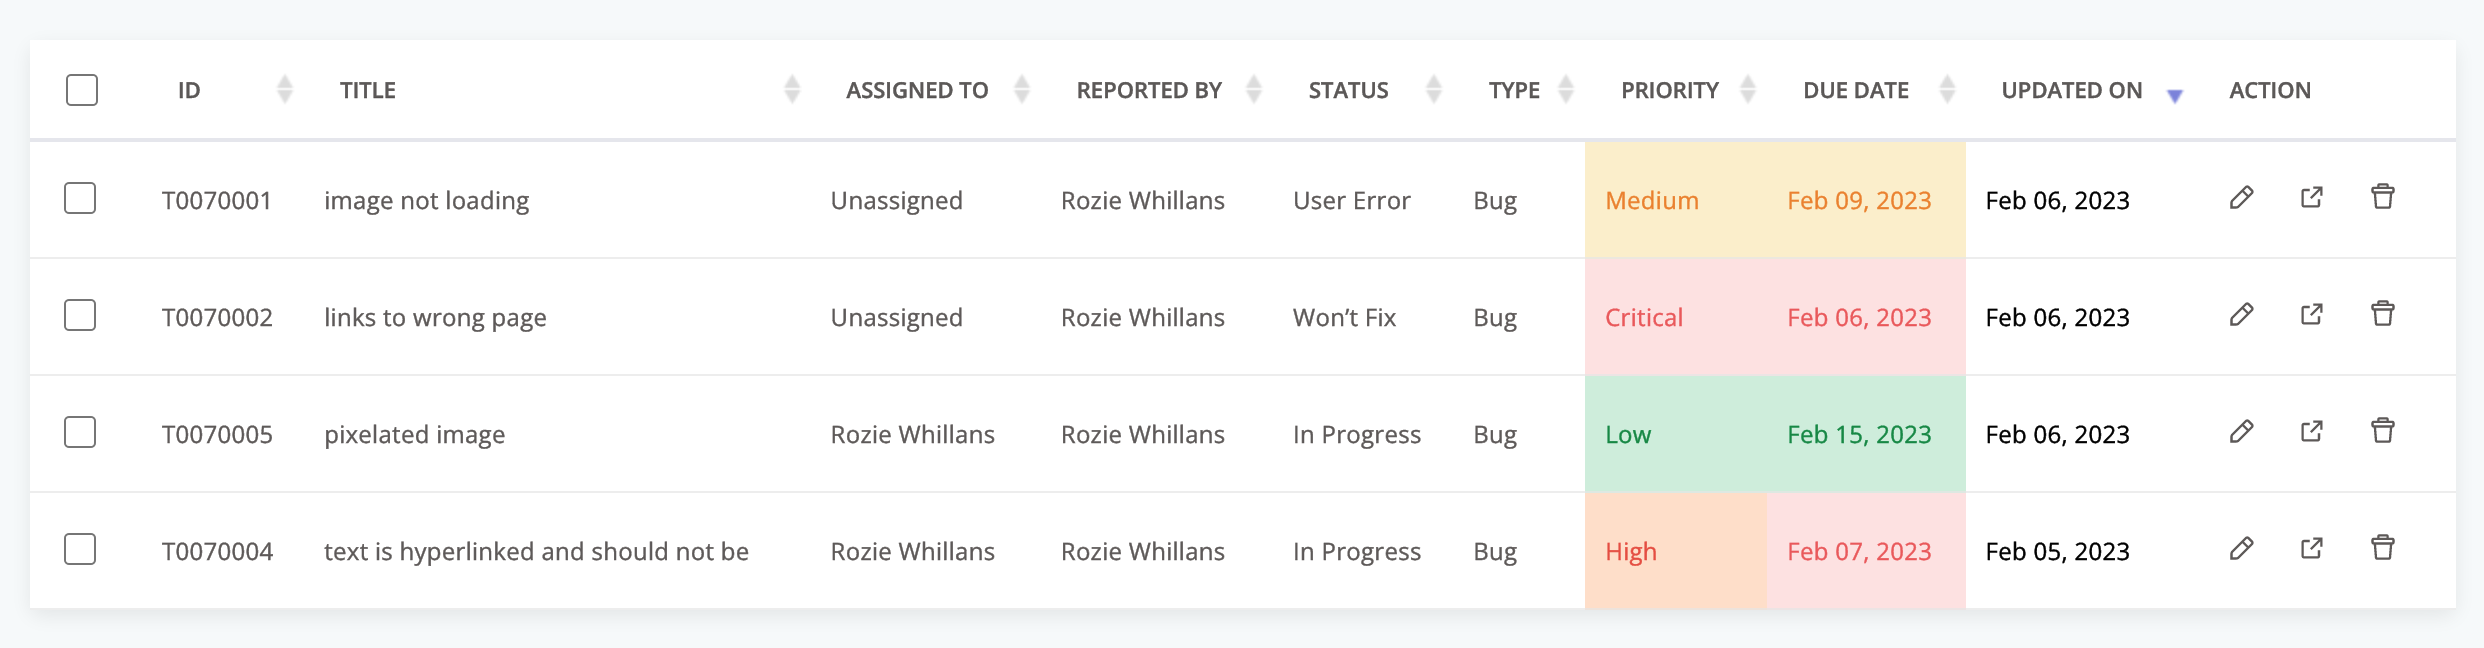 prioritizing issues in zipBoard during a bug bash